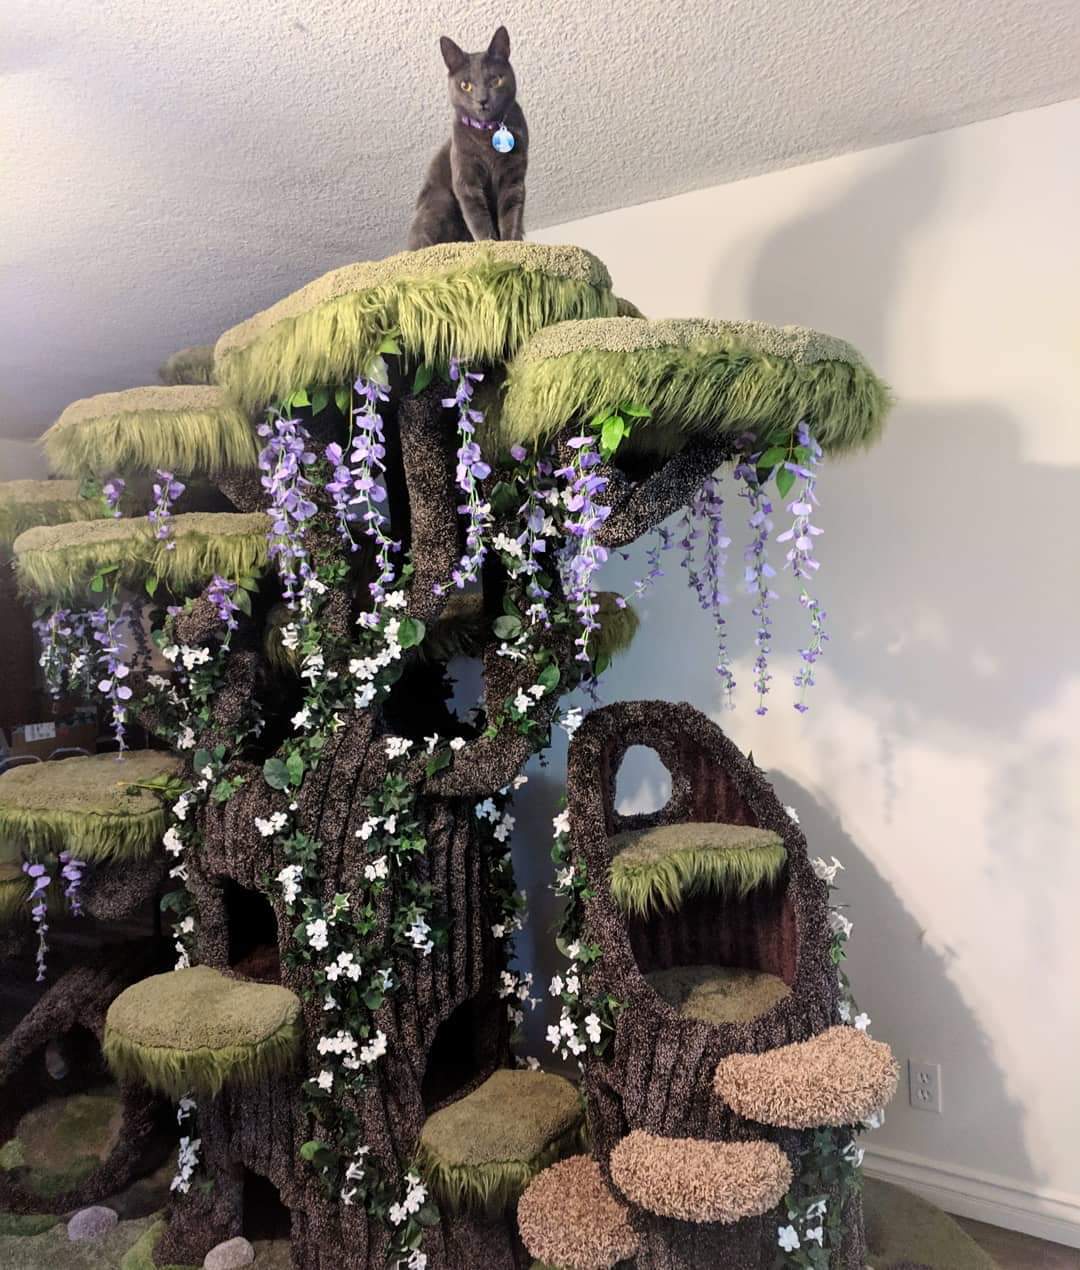 memes - enchanted forest cat tree